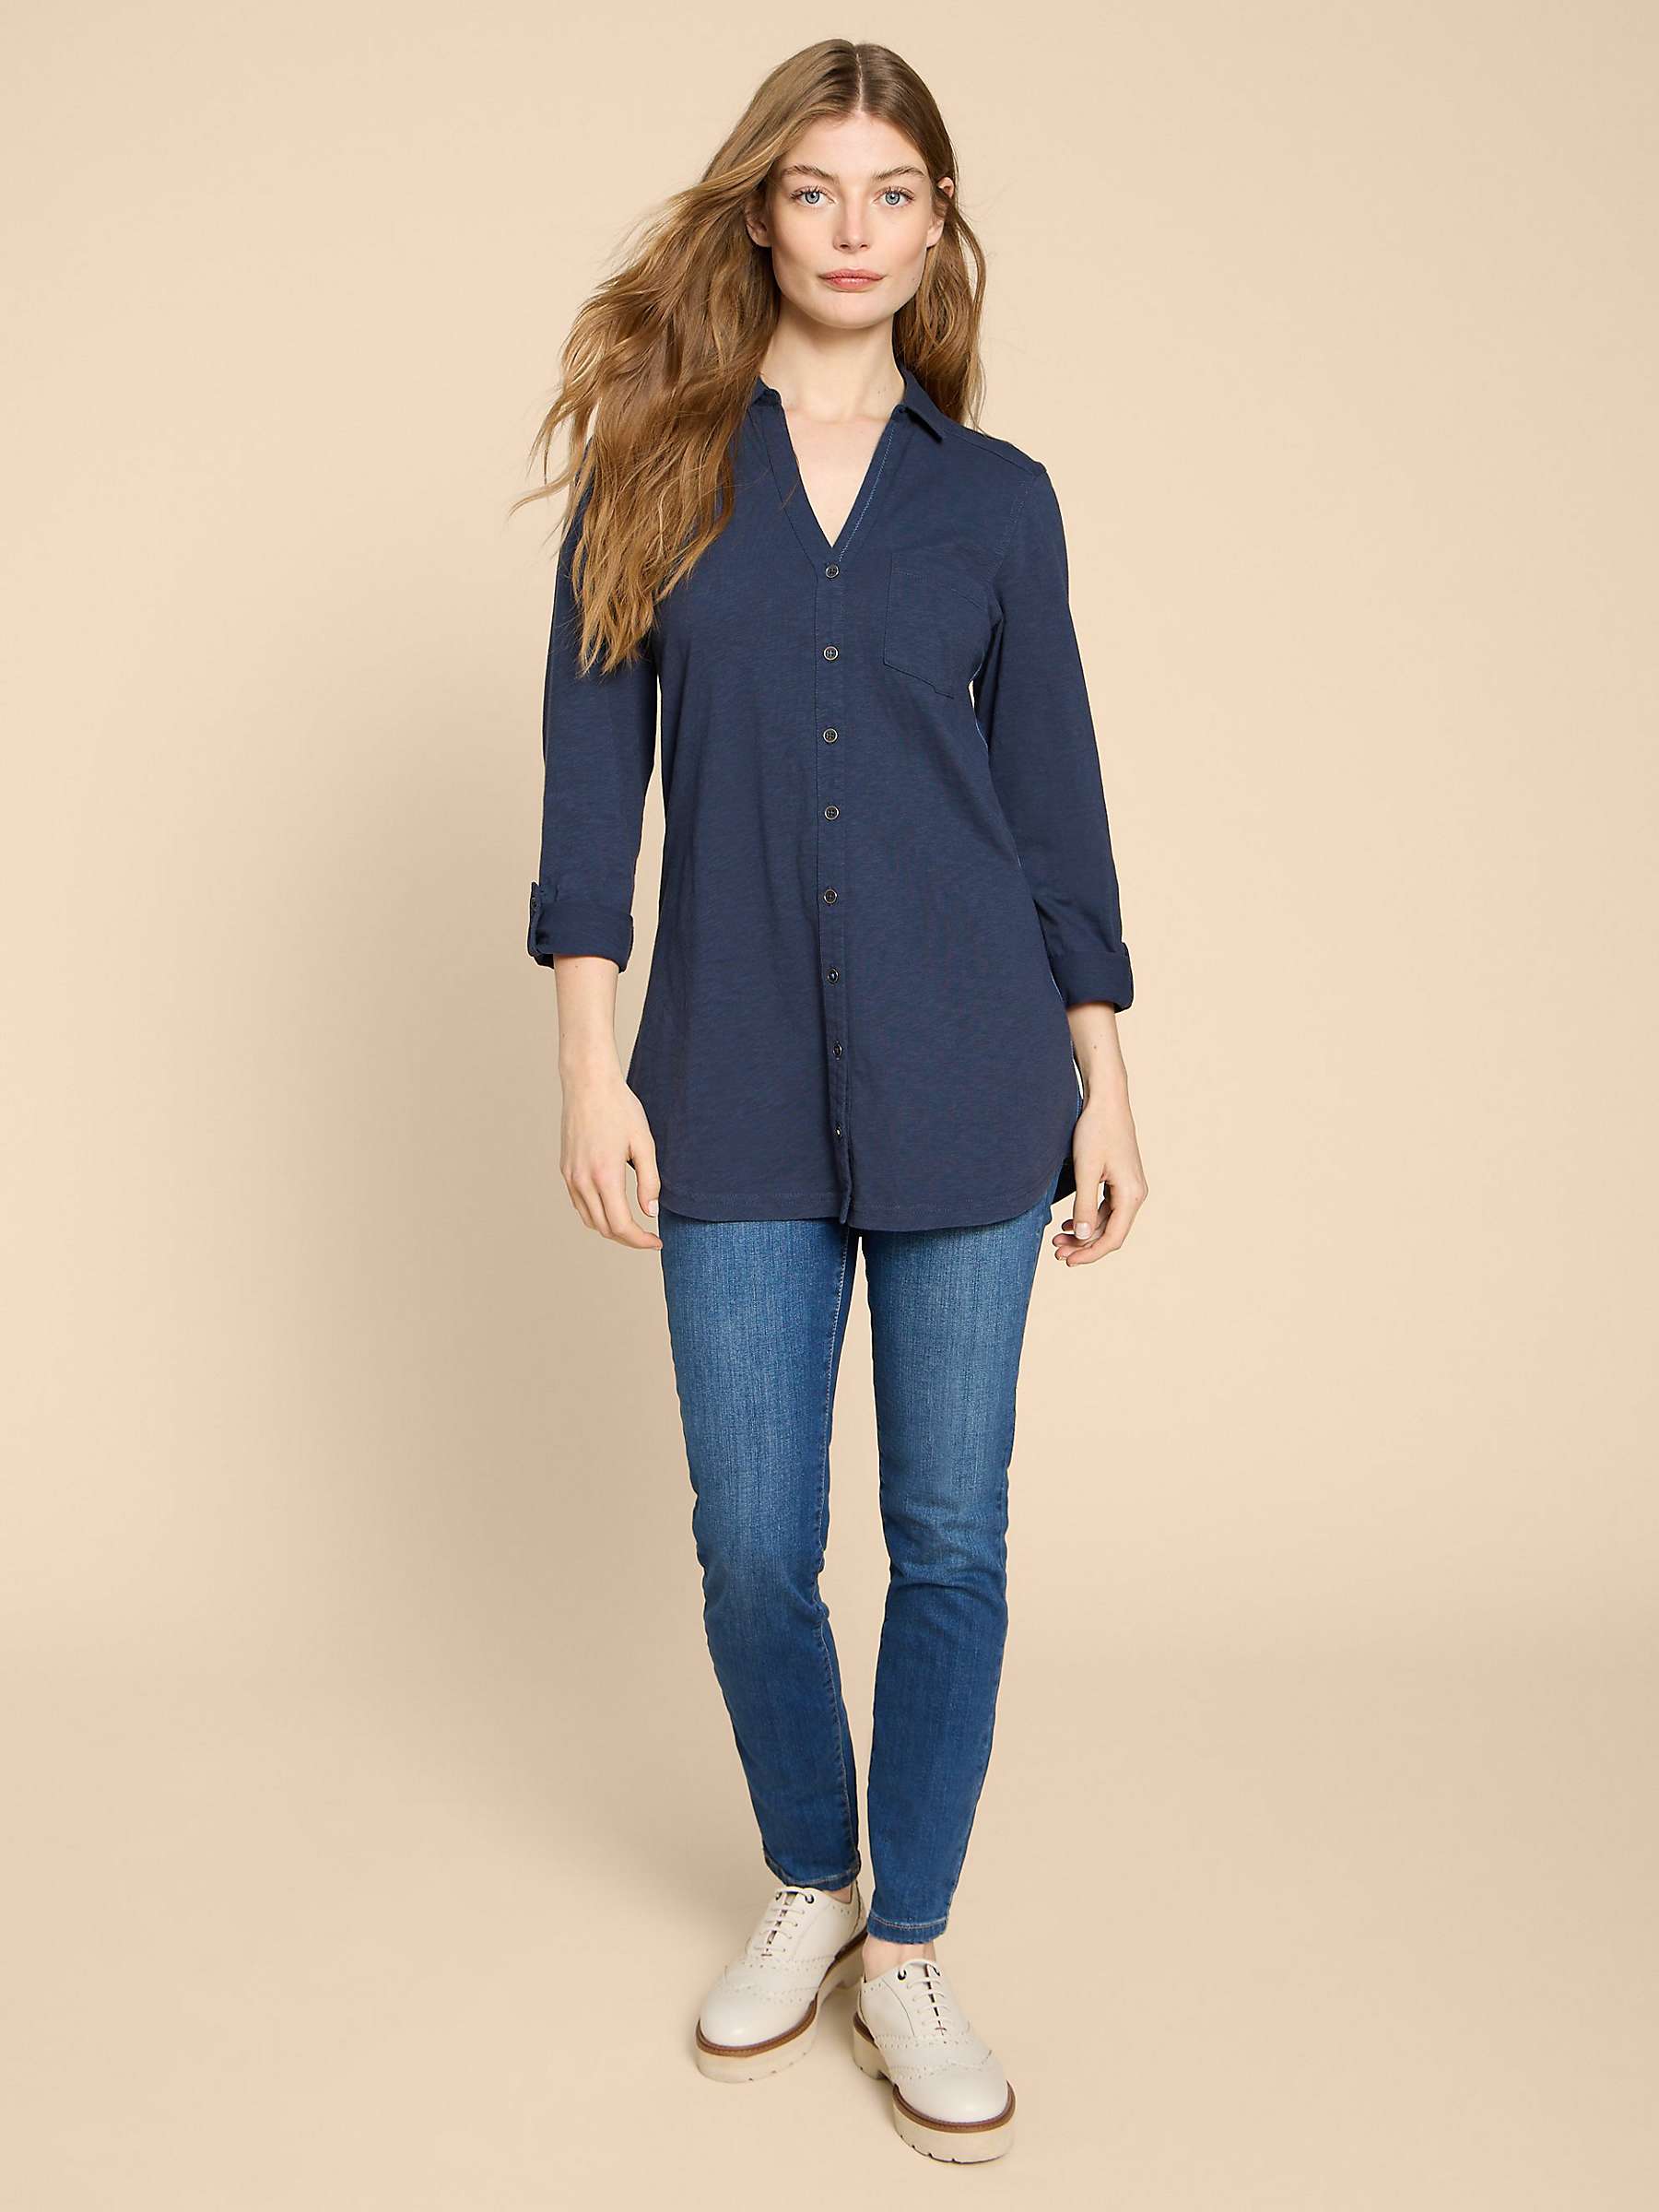 Buy White Stuff Annie Jersey Shirt, French Navy Online at johnlewis.com